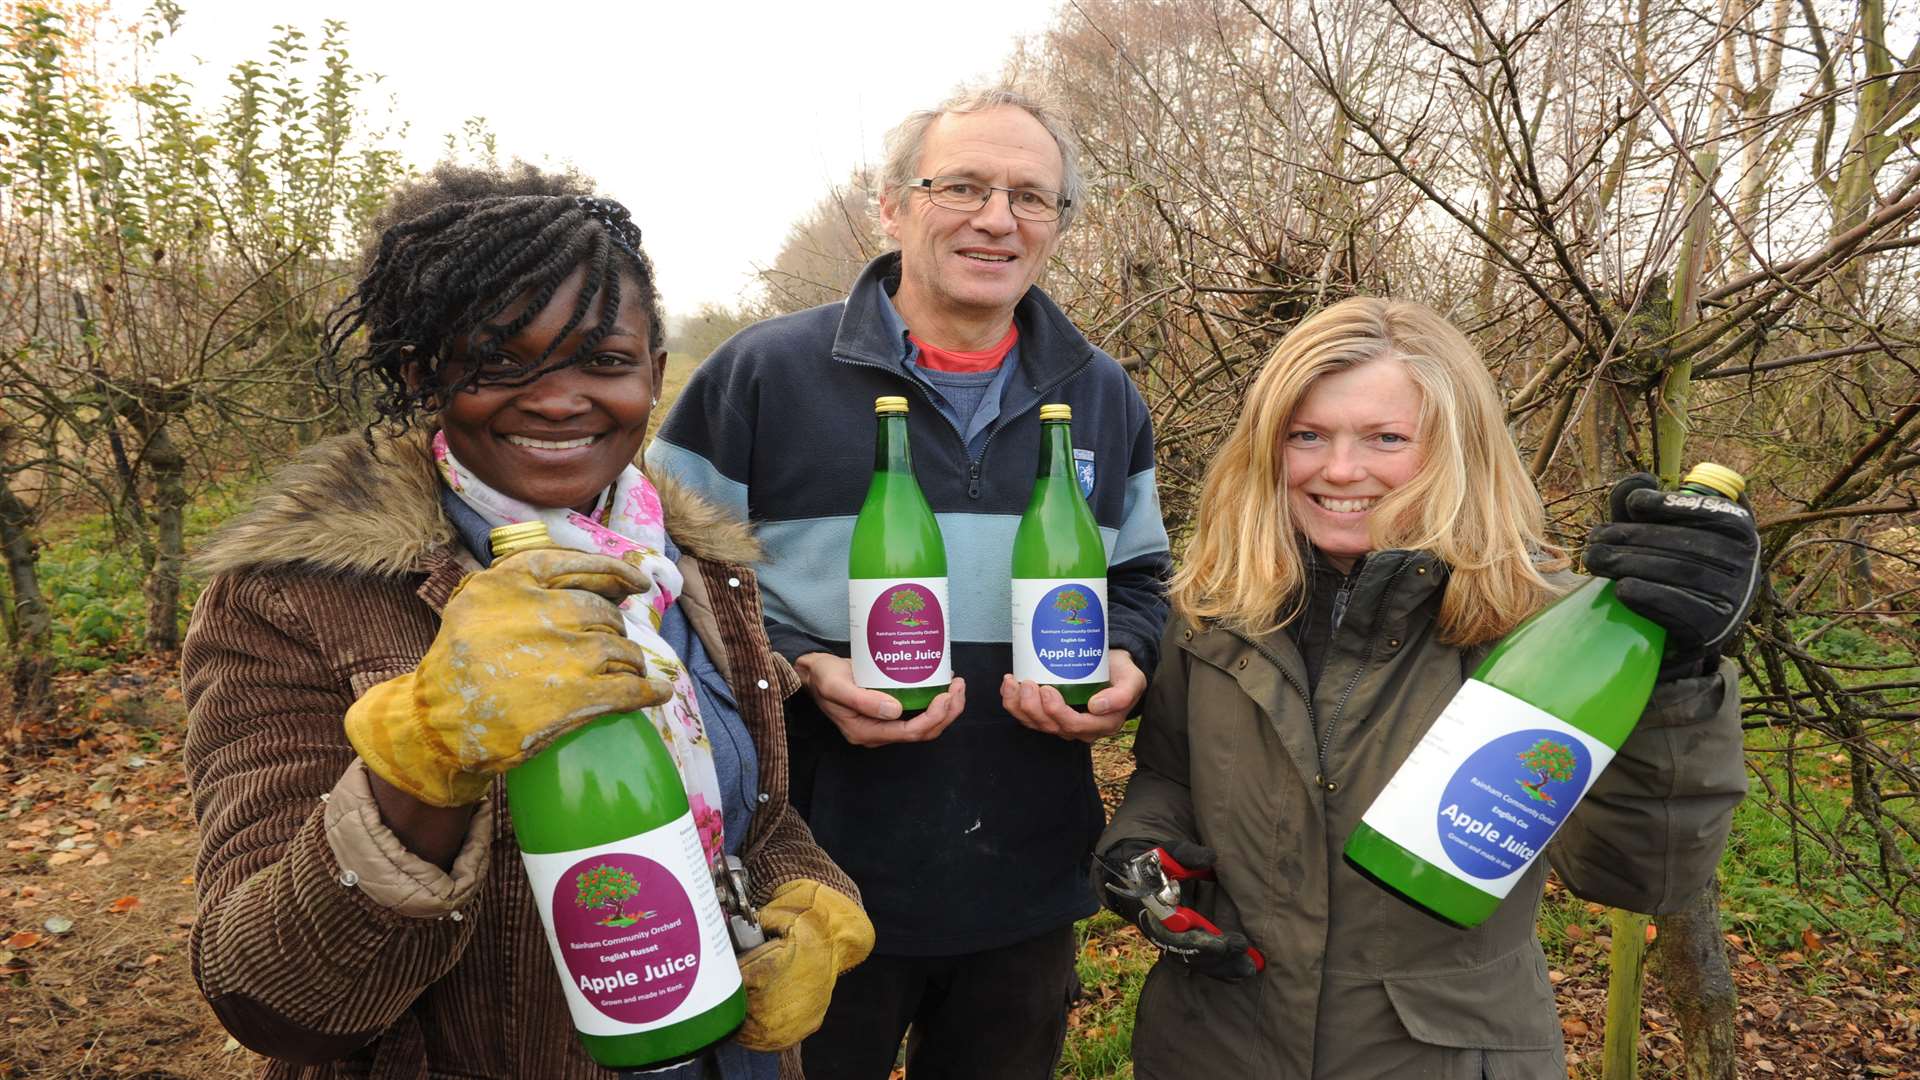 Volunteers Kerry Edy, Jo Elsmore and Rachel Ford with the apple juice